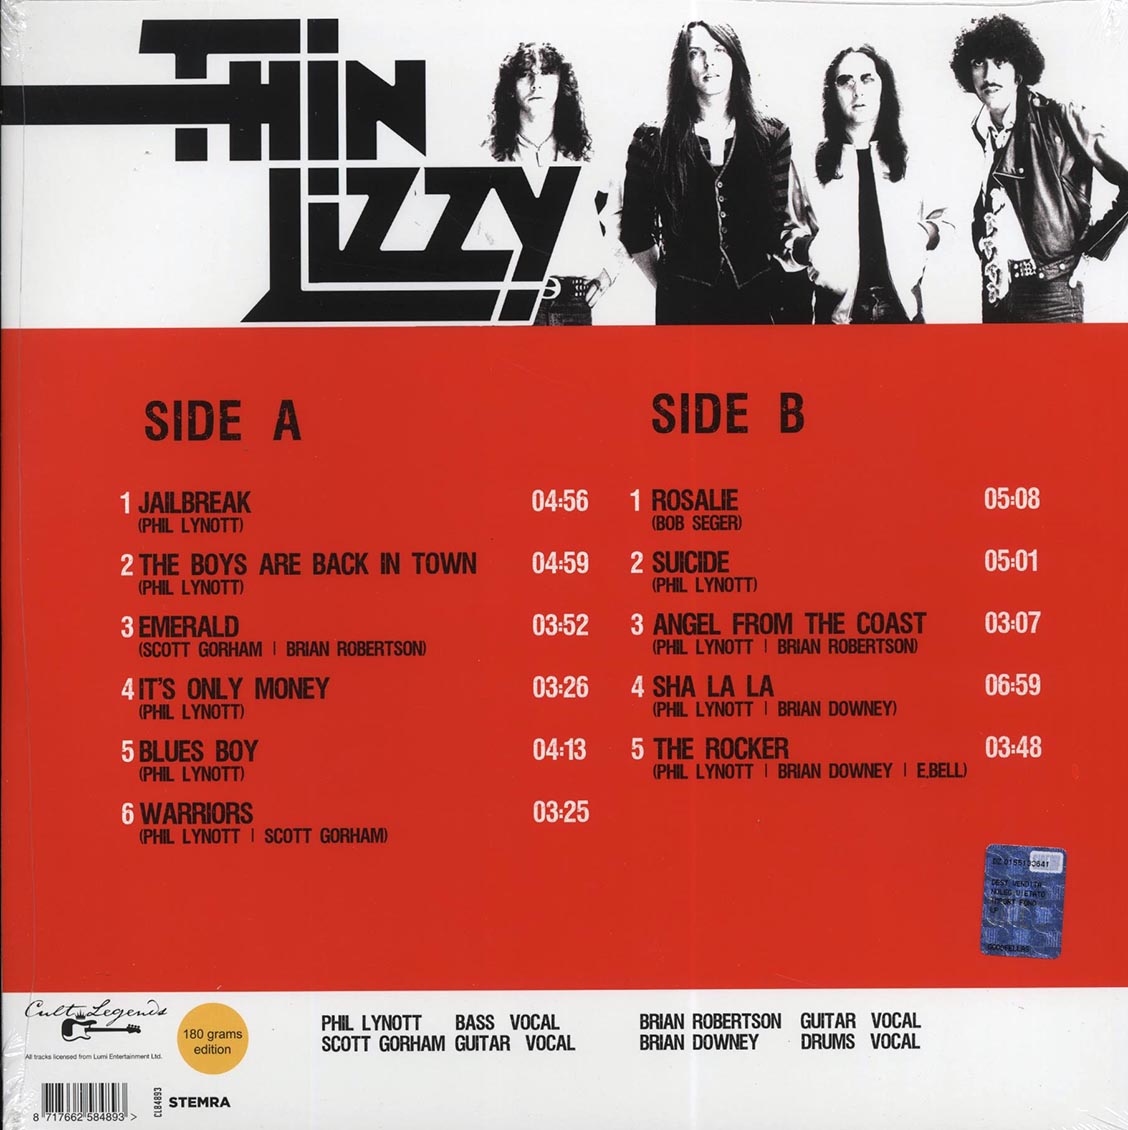 Thin Lizzy - The Boys Are Back: Live In Chicago 1976, Riviera Theatre, April 21st